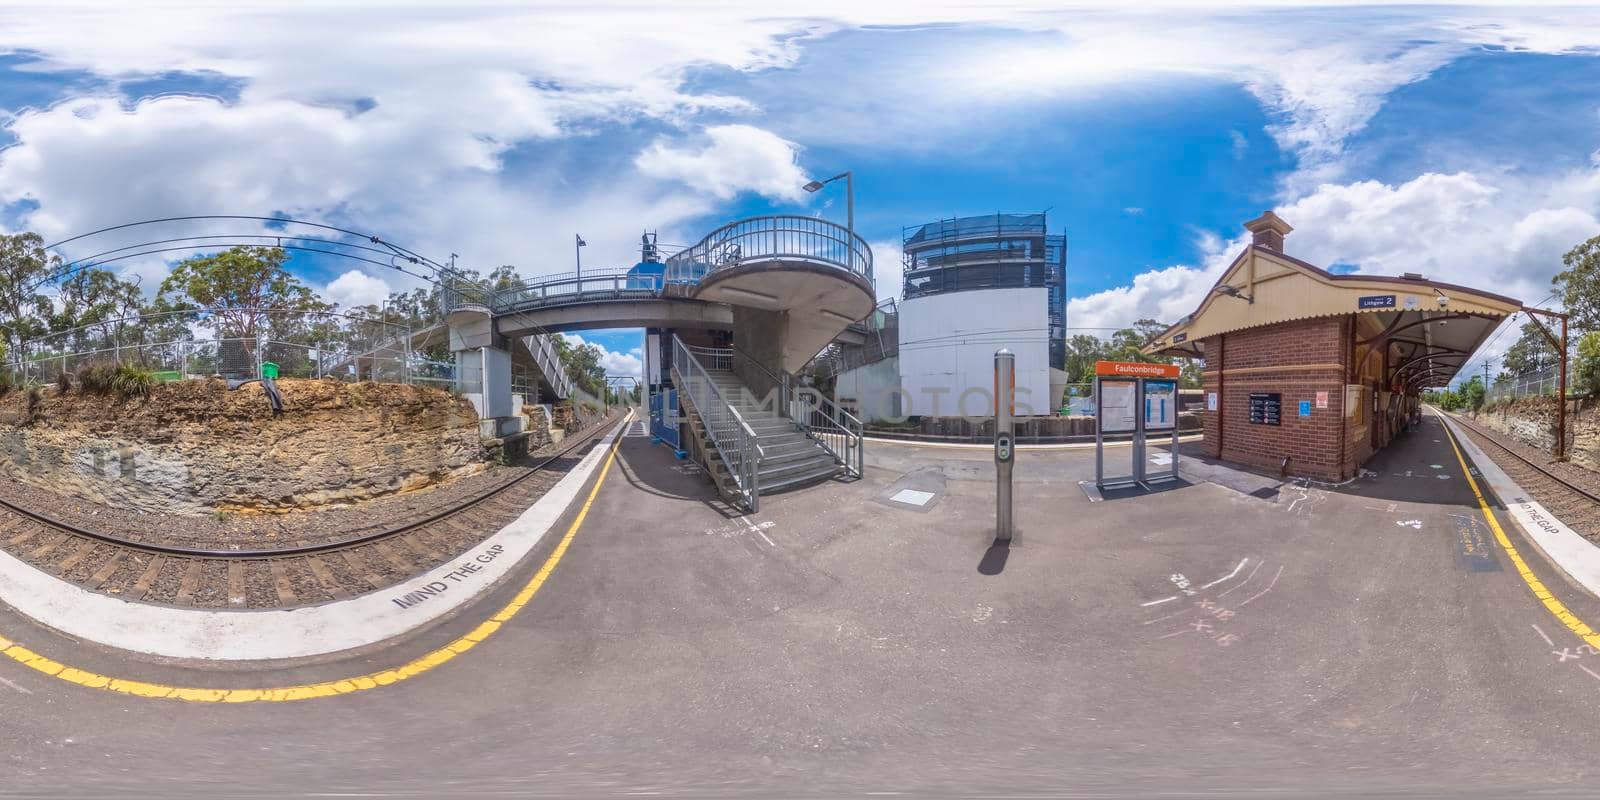 Spherical 360-degree panorama photograph of the Faulconbridge Train Station in The Blue Mountains in regional New South Wales in Australia